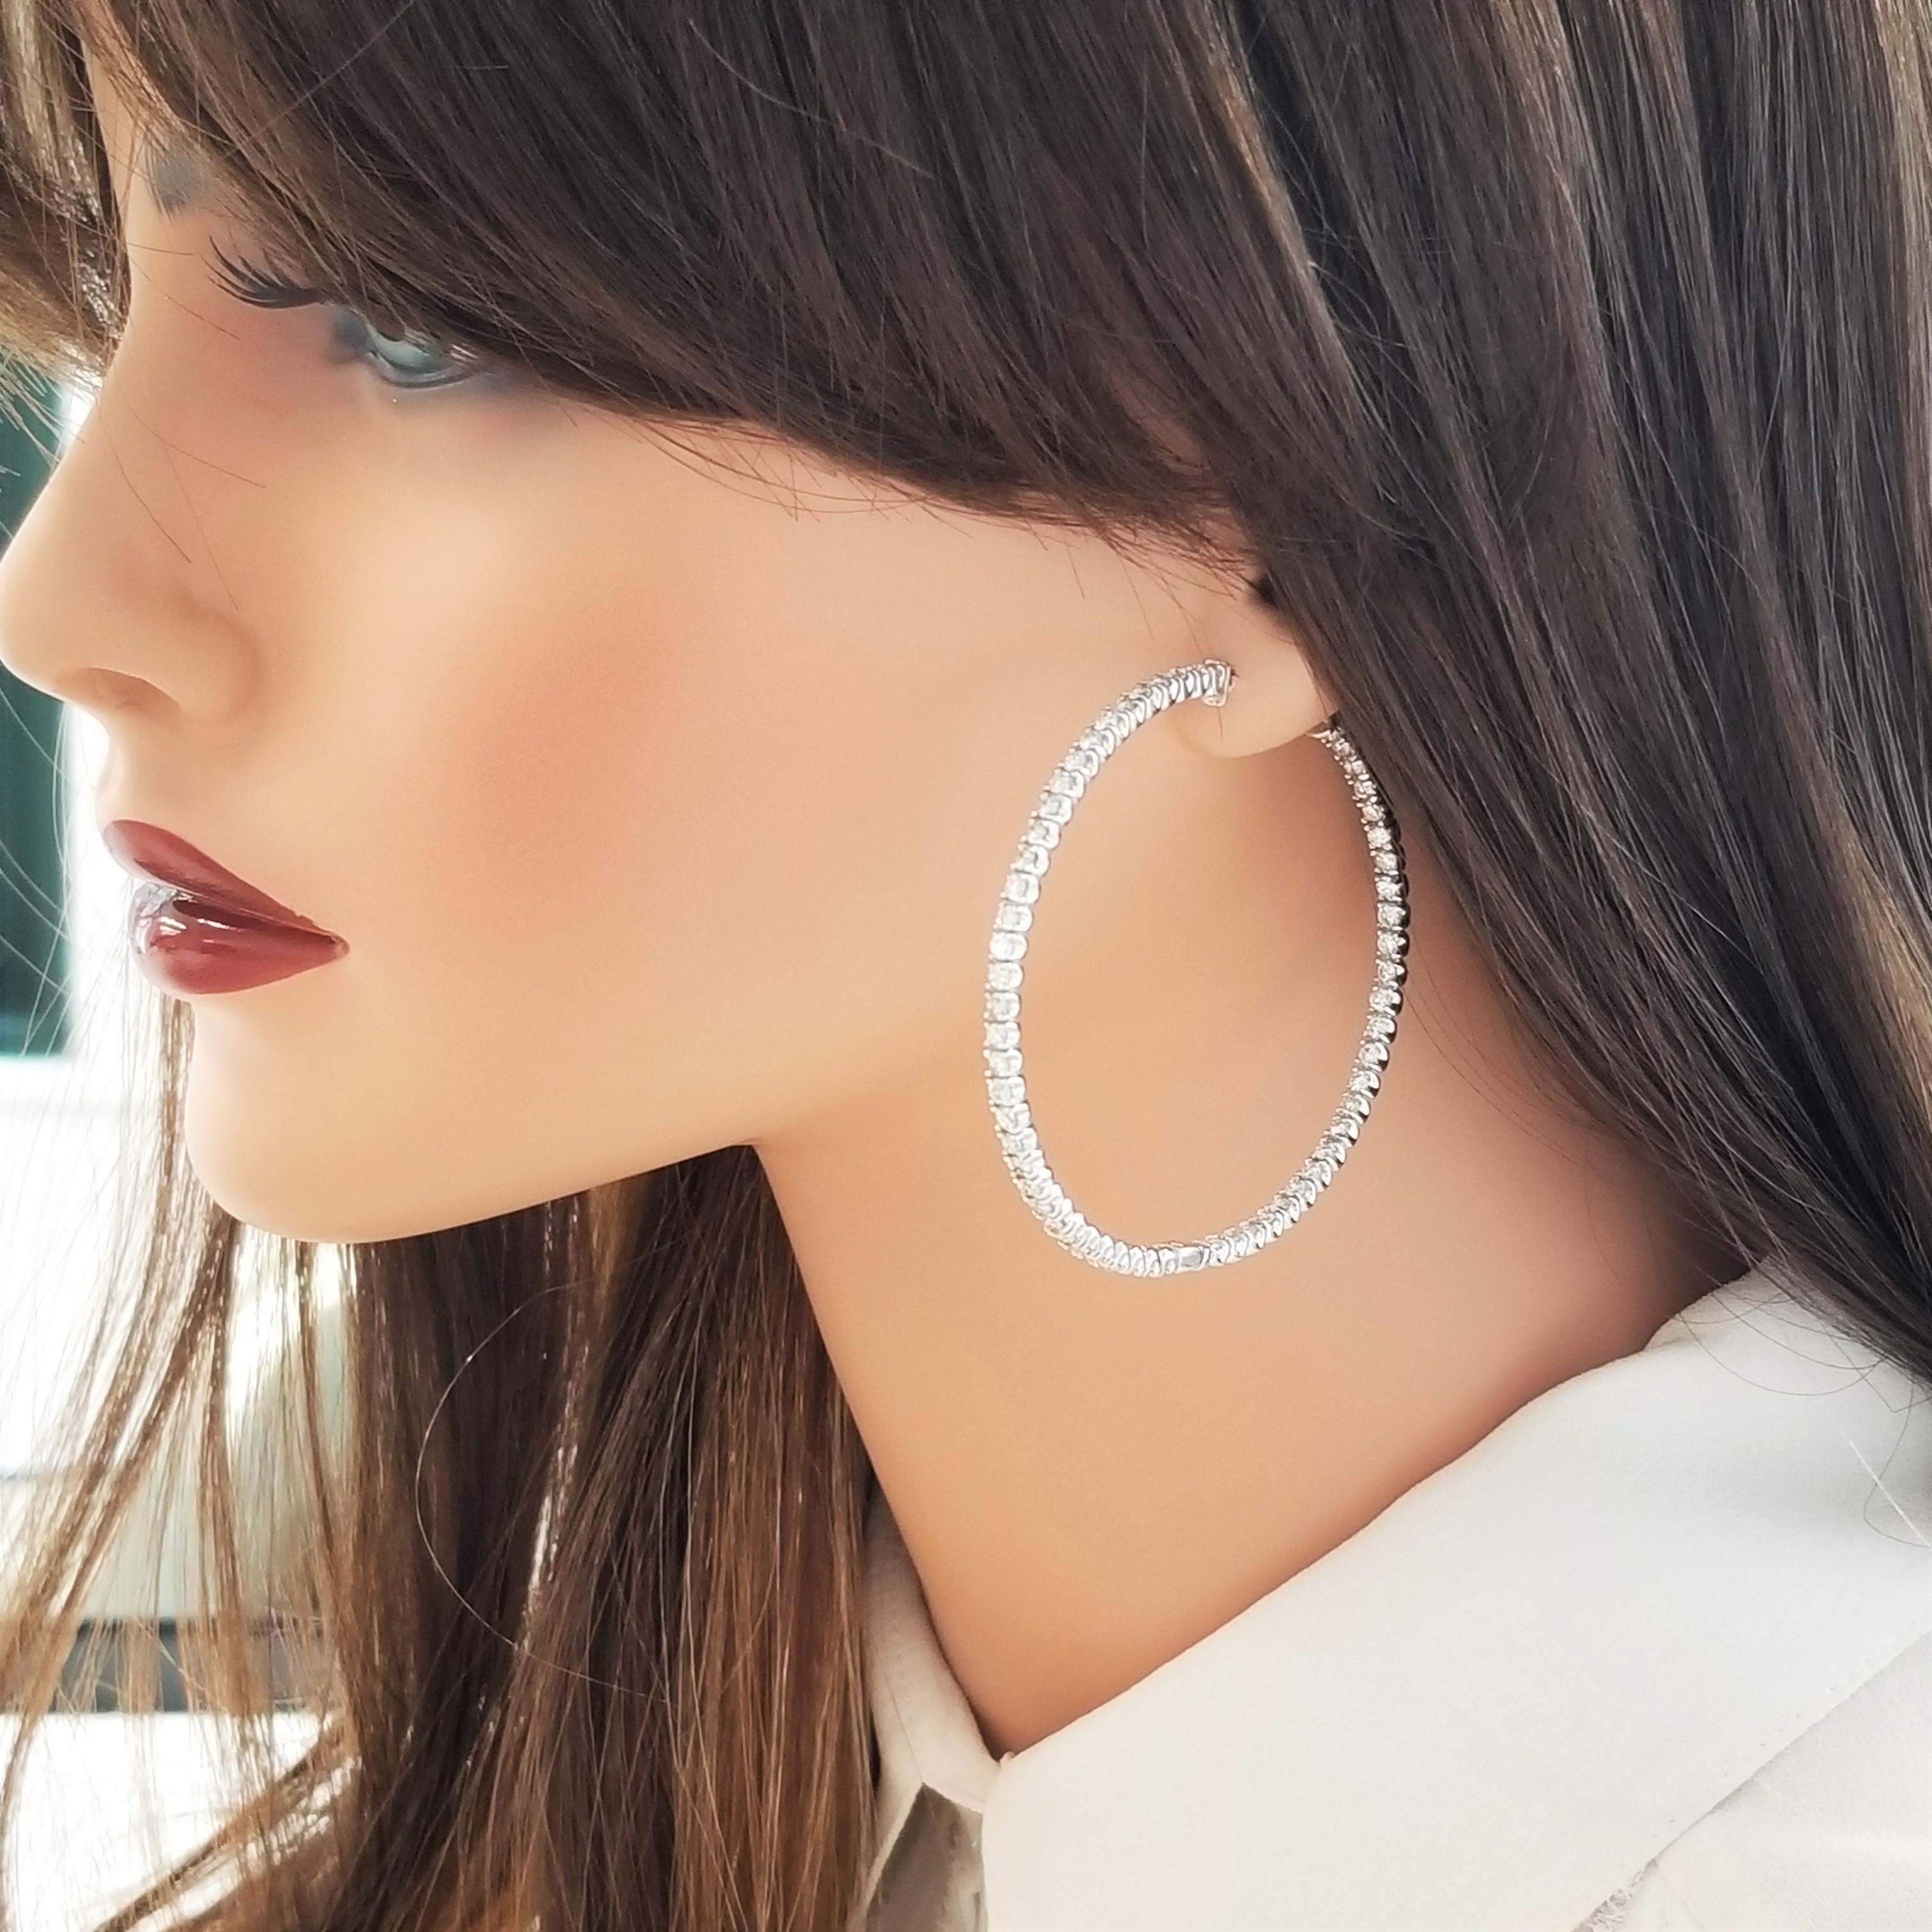 This is a lovely pair of inside & outside hoops, set with 114 stunning diamonds. 4.75 carats face forward, the only direction that matters! Precision set in 14 k white gold earrings, these diamond hoops take it to the next level.